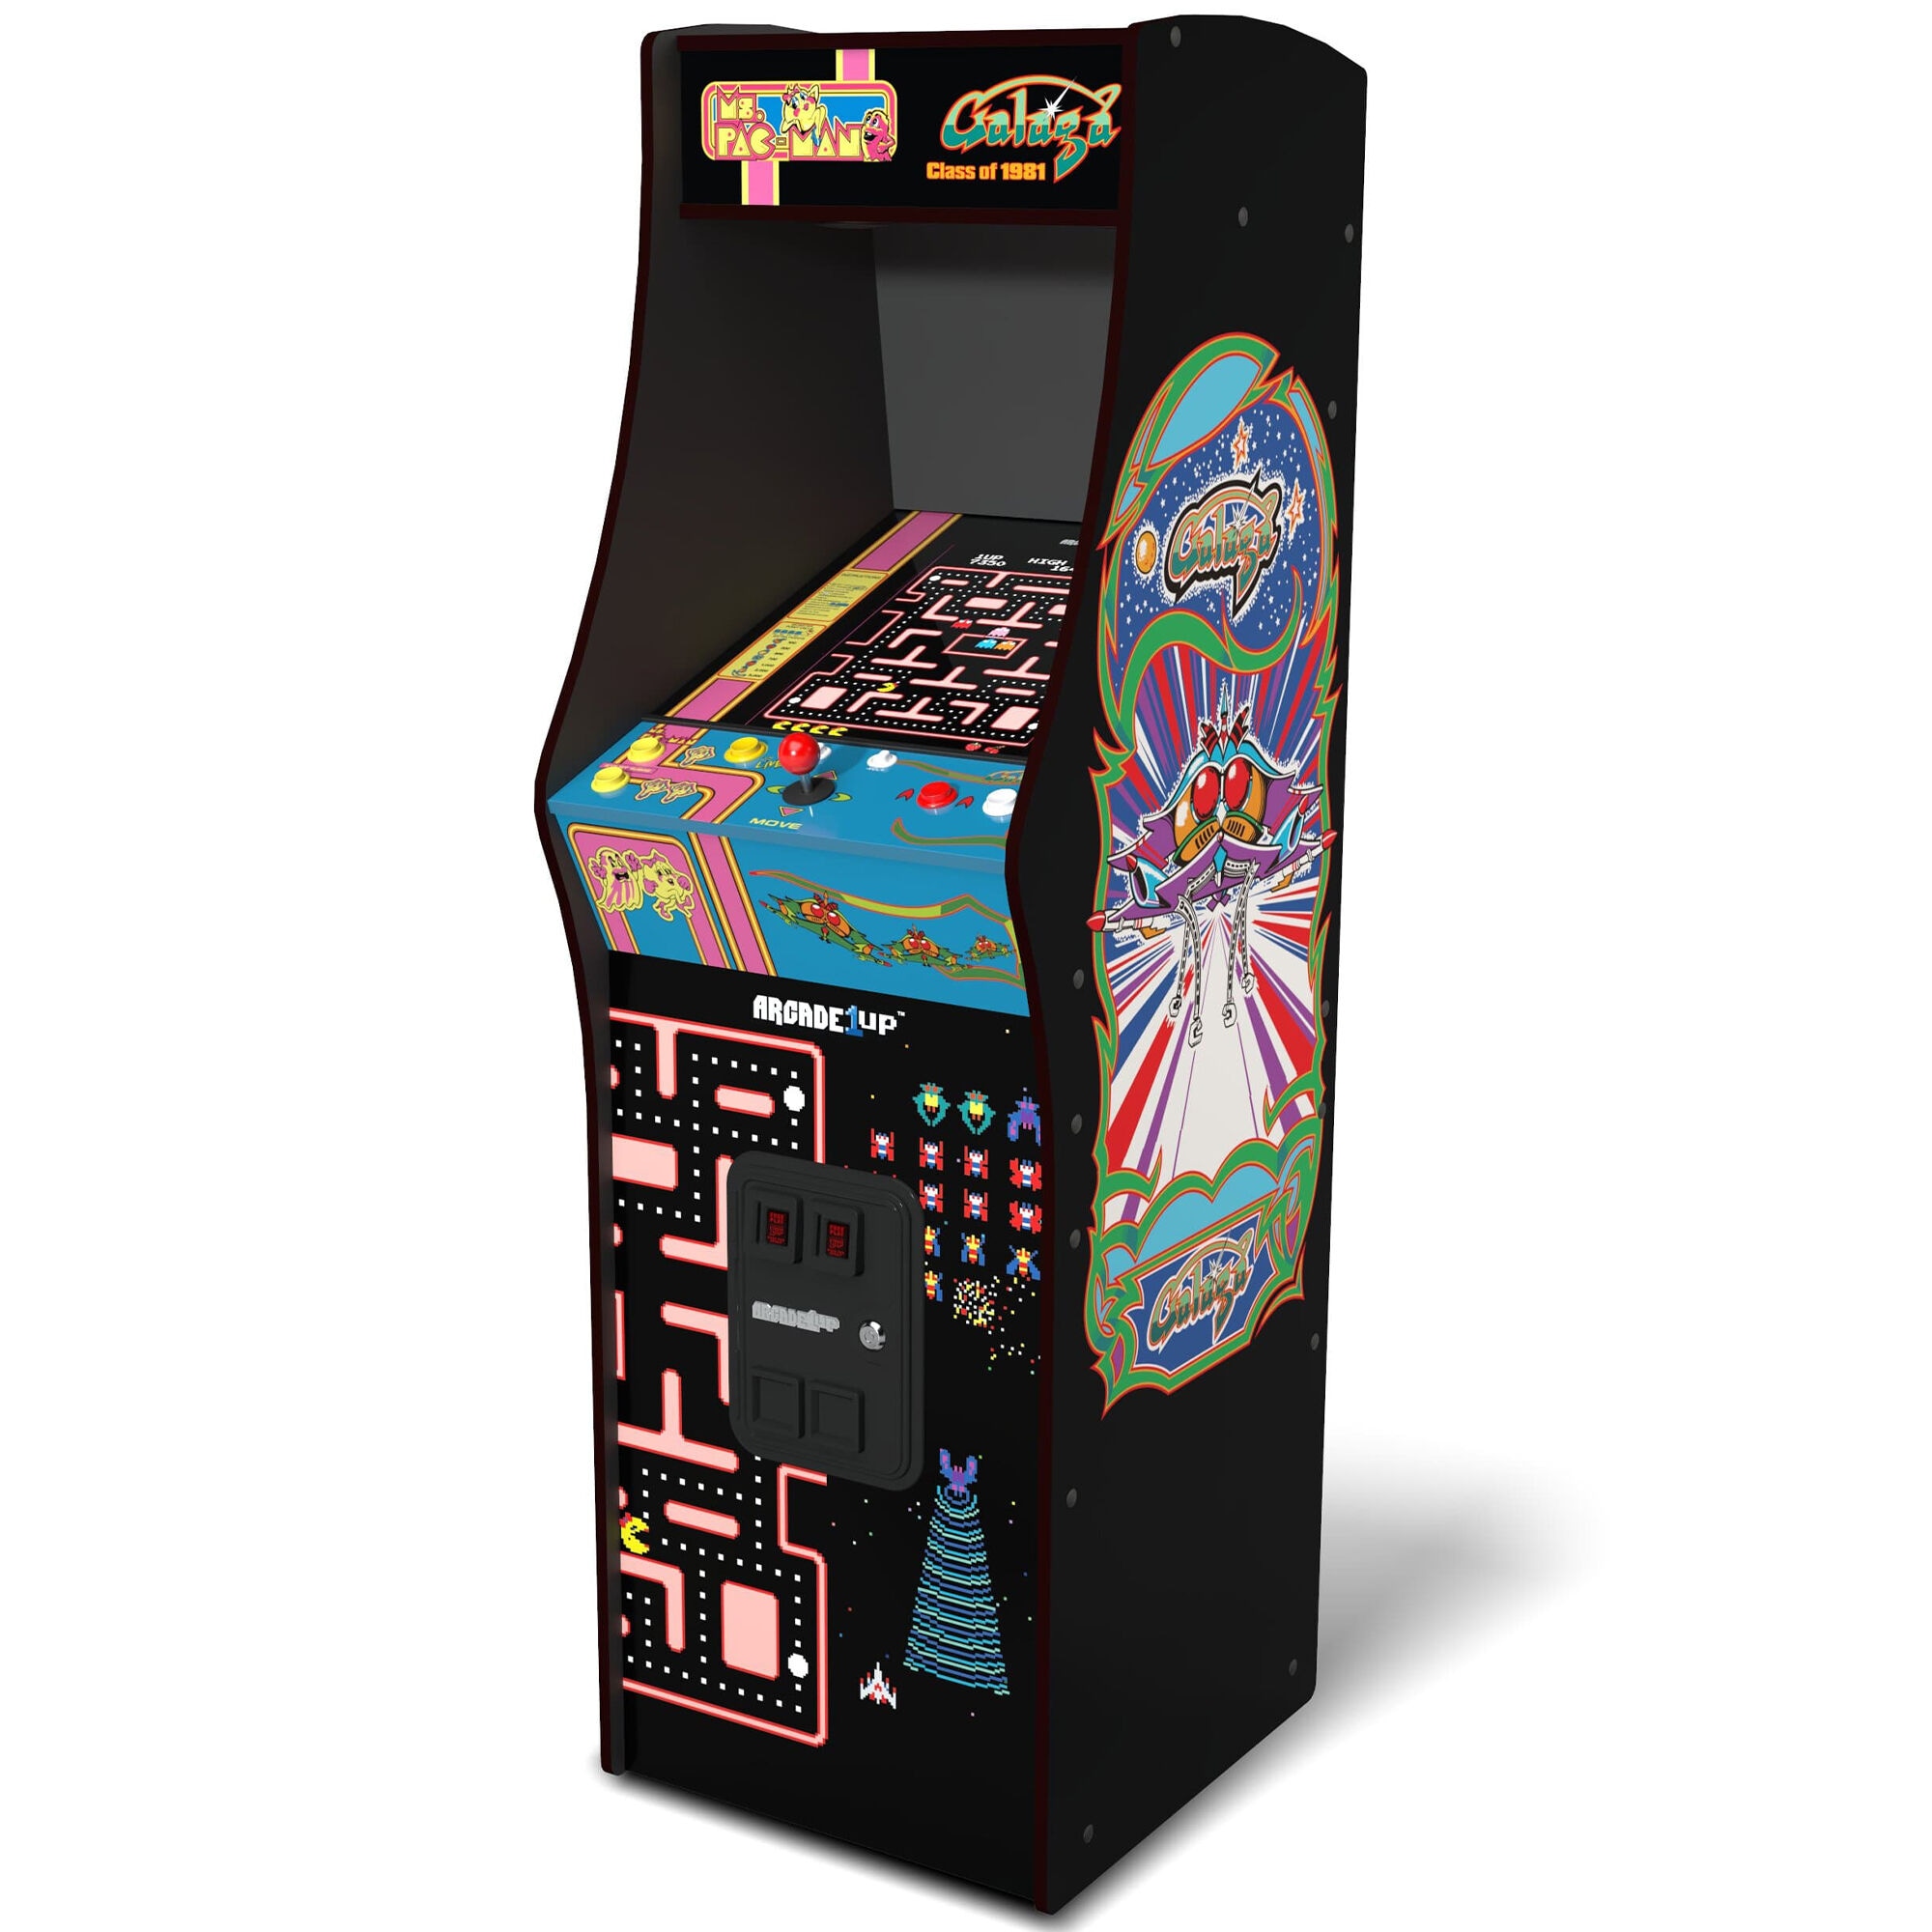 Arcade1Up Ms. PAC-MAN & GALAGA Class of 81 Deluxe Arcade Game